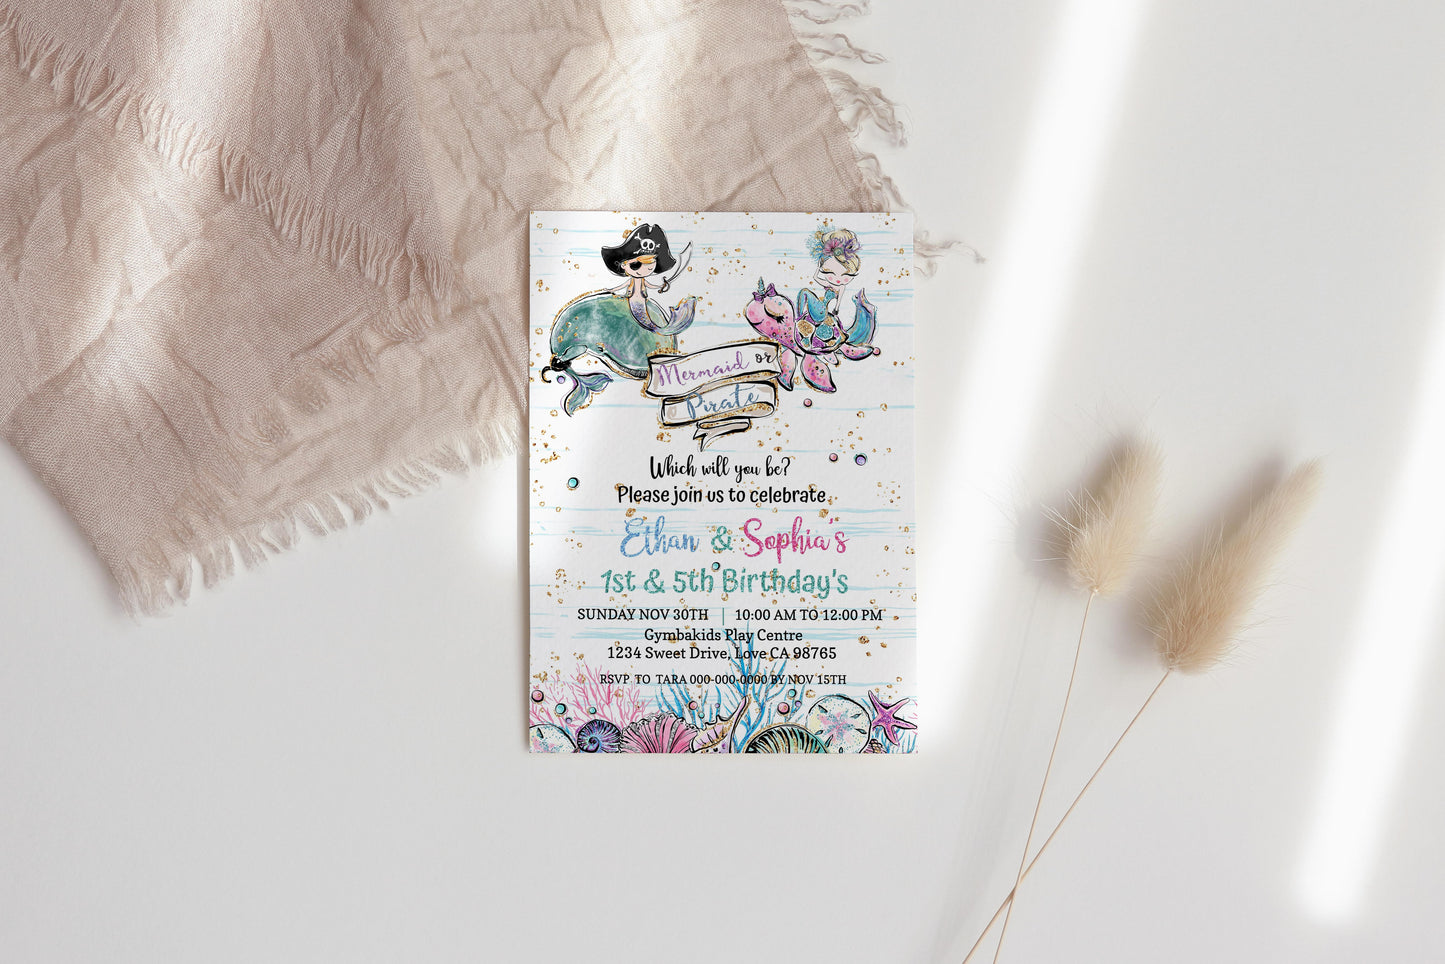 Pirate and Mermaid Party Invitation | EDITABLE Twins Birthday Invite - 20A1